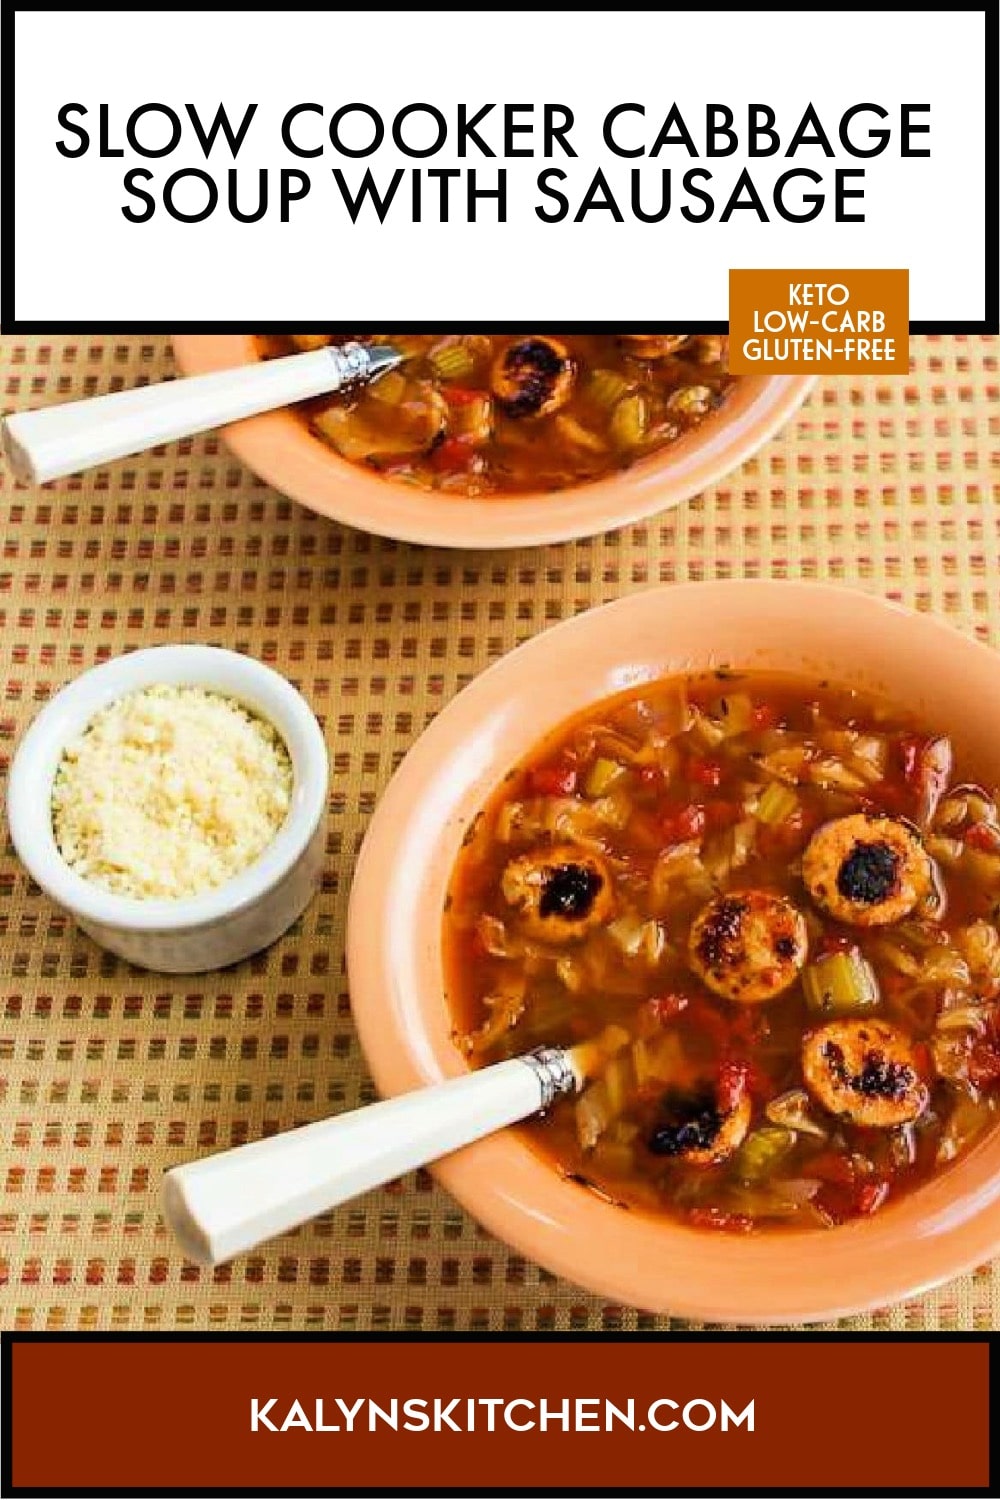 Pinterest image of Slow Cooker Cabbage Soup with Sausage